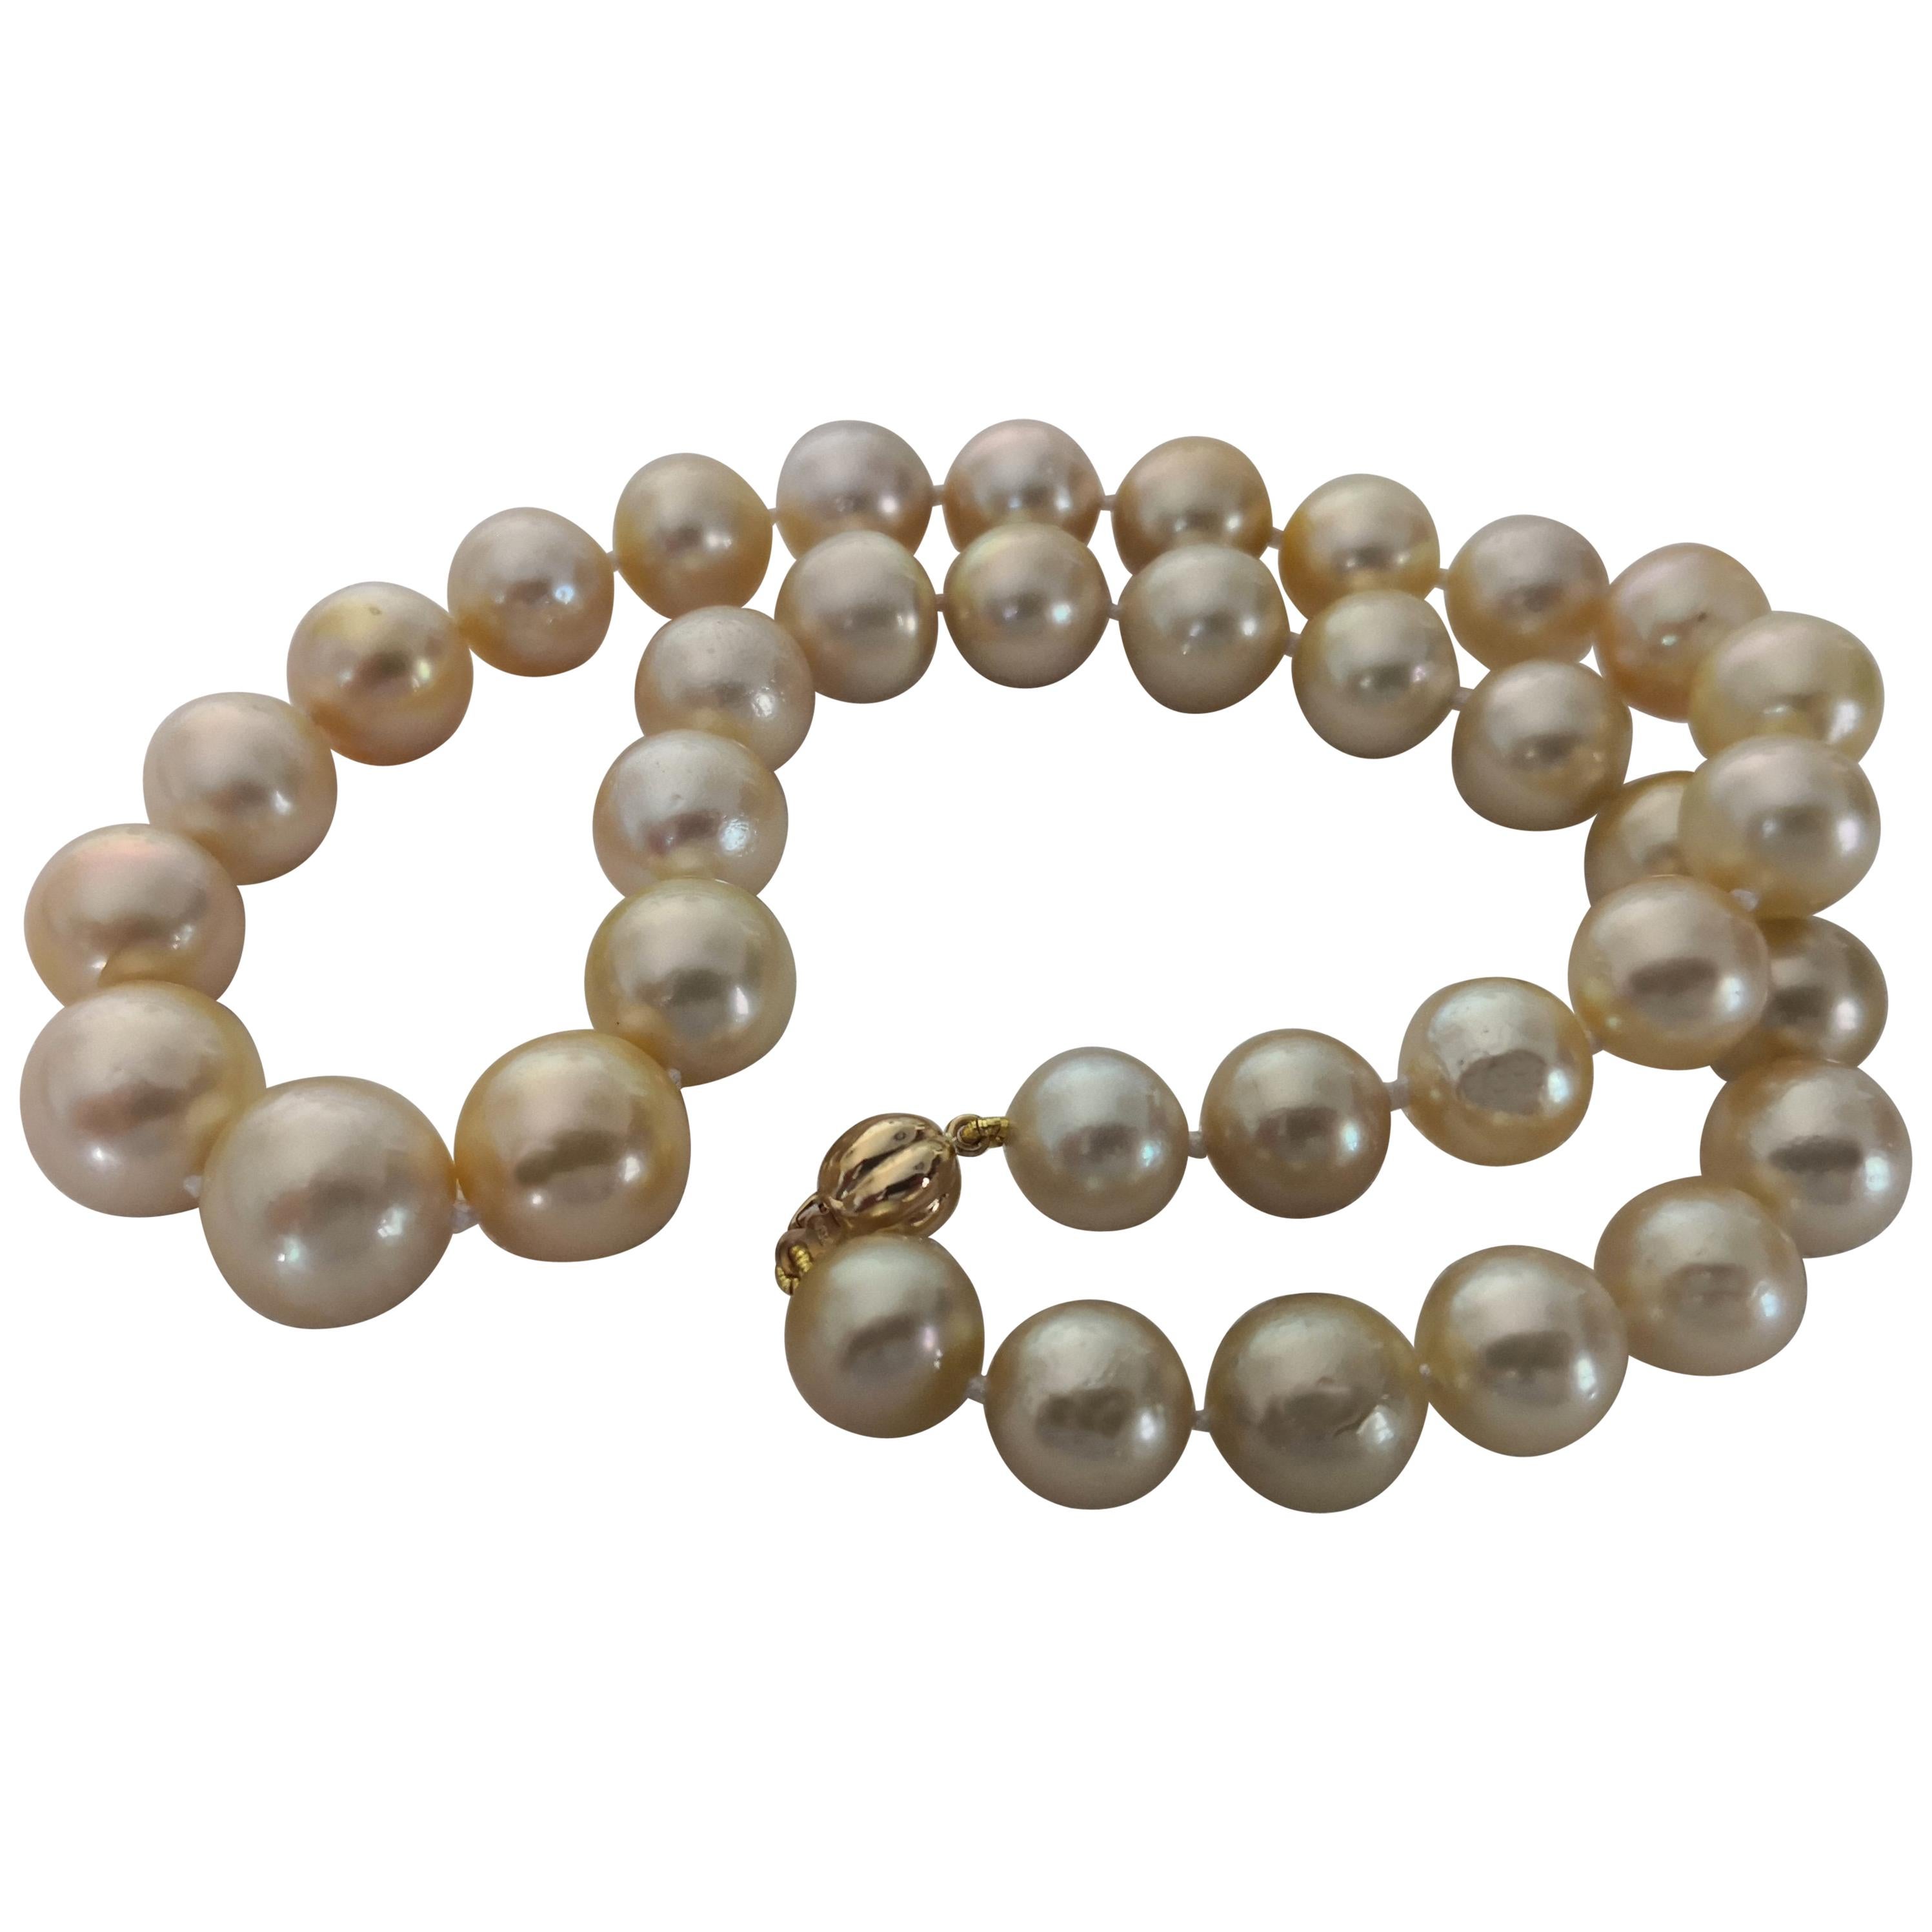 Gorgeous Natural Color South Sea Pearls Necklace with High Luster and Orient For Sale